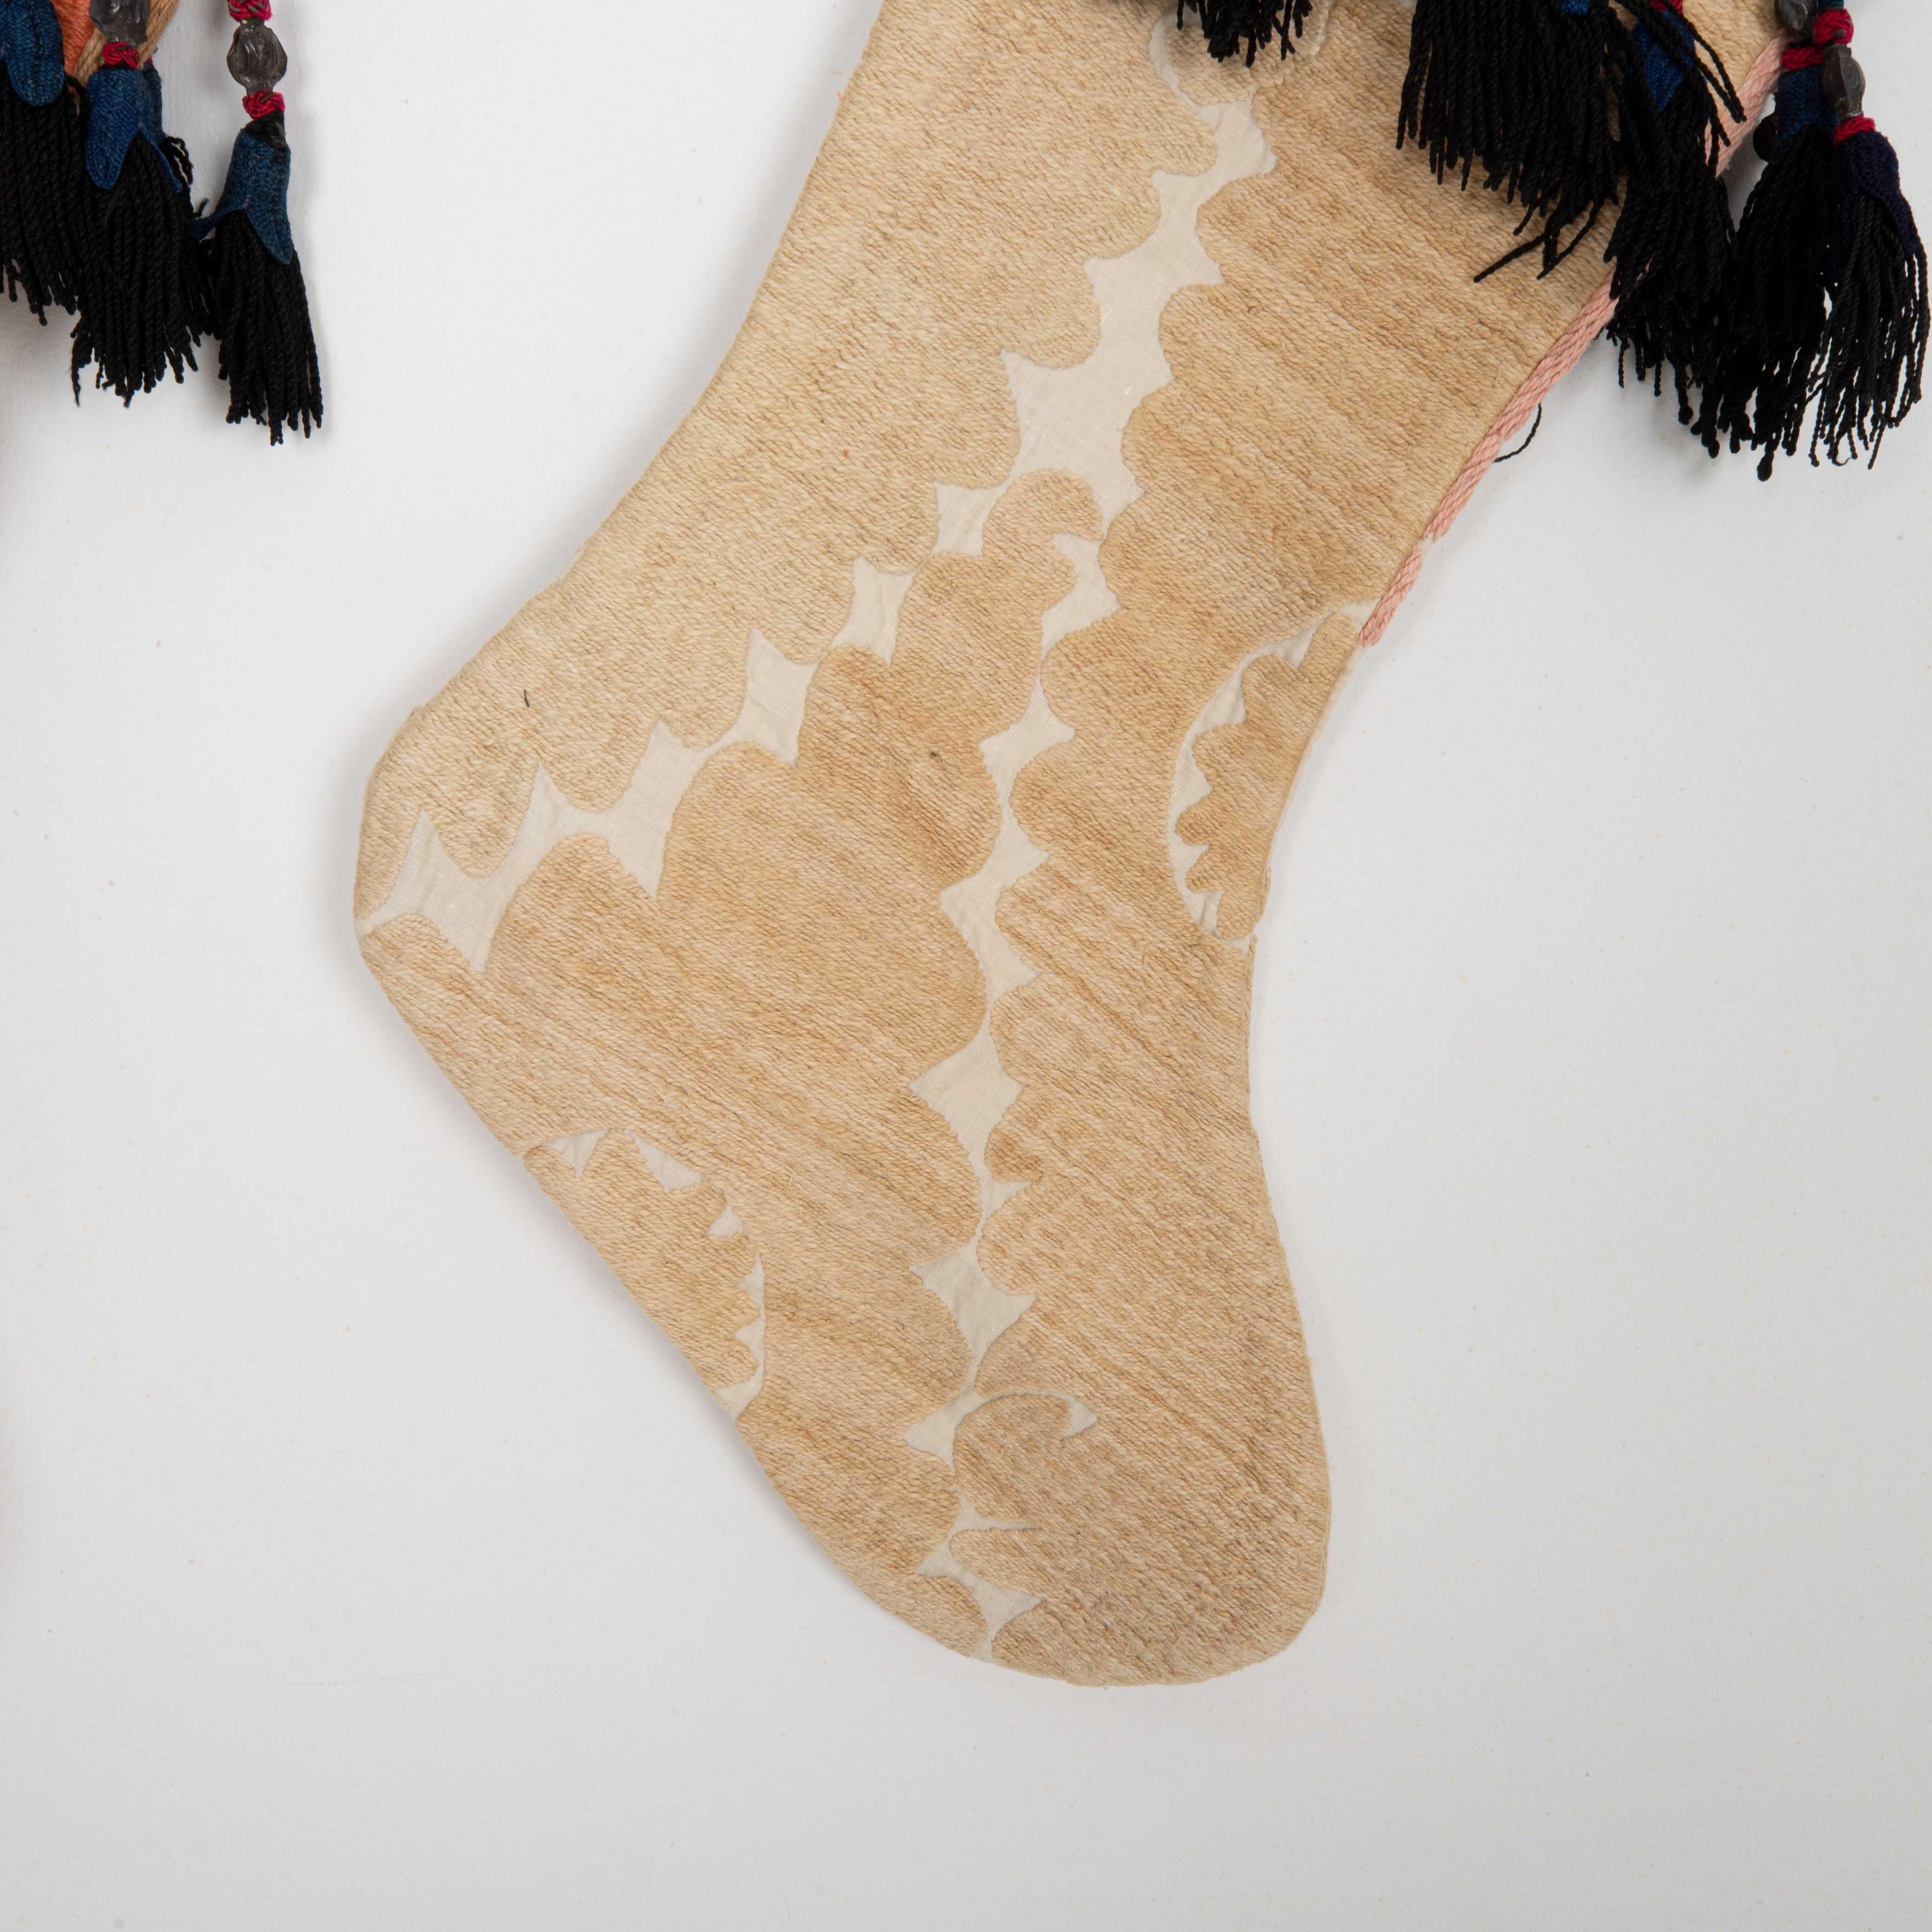 Uzbek Double Sided Christmas Stockings Made from Vintage Suzani Fragments For Sale